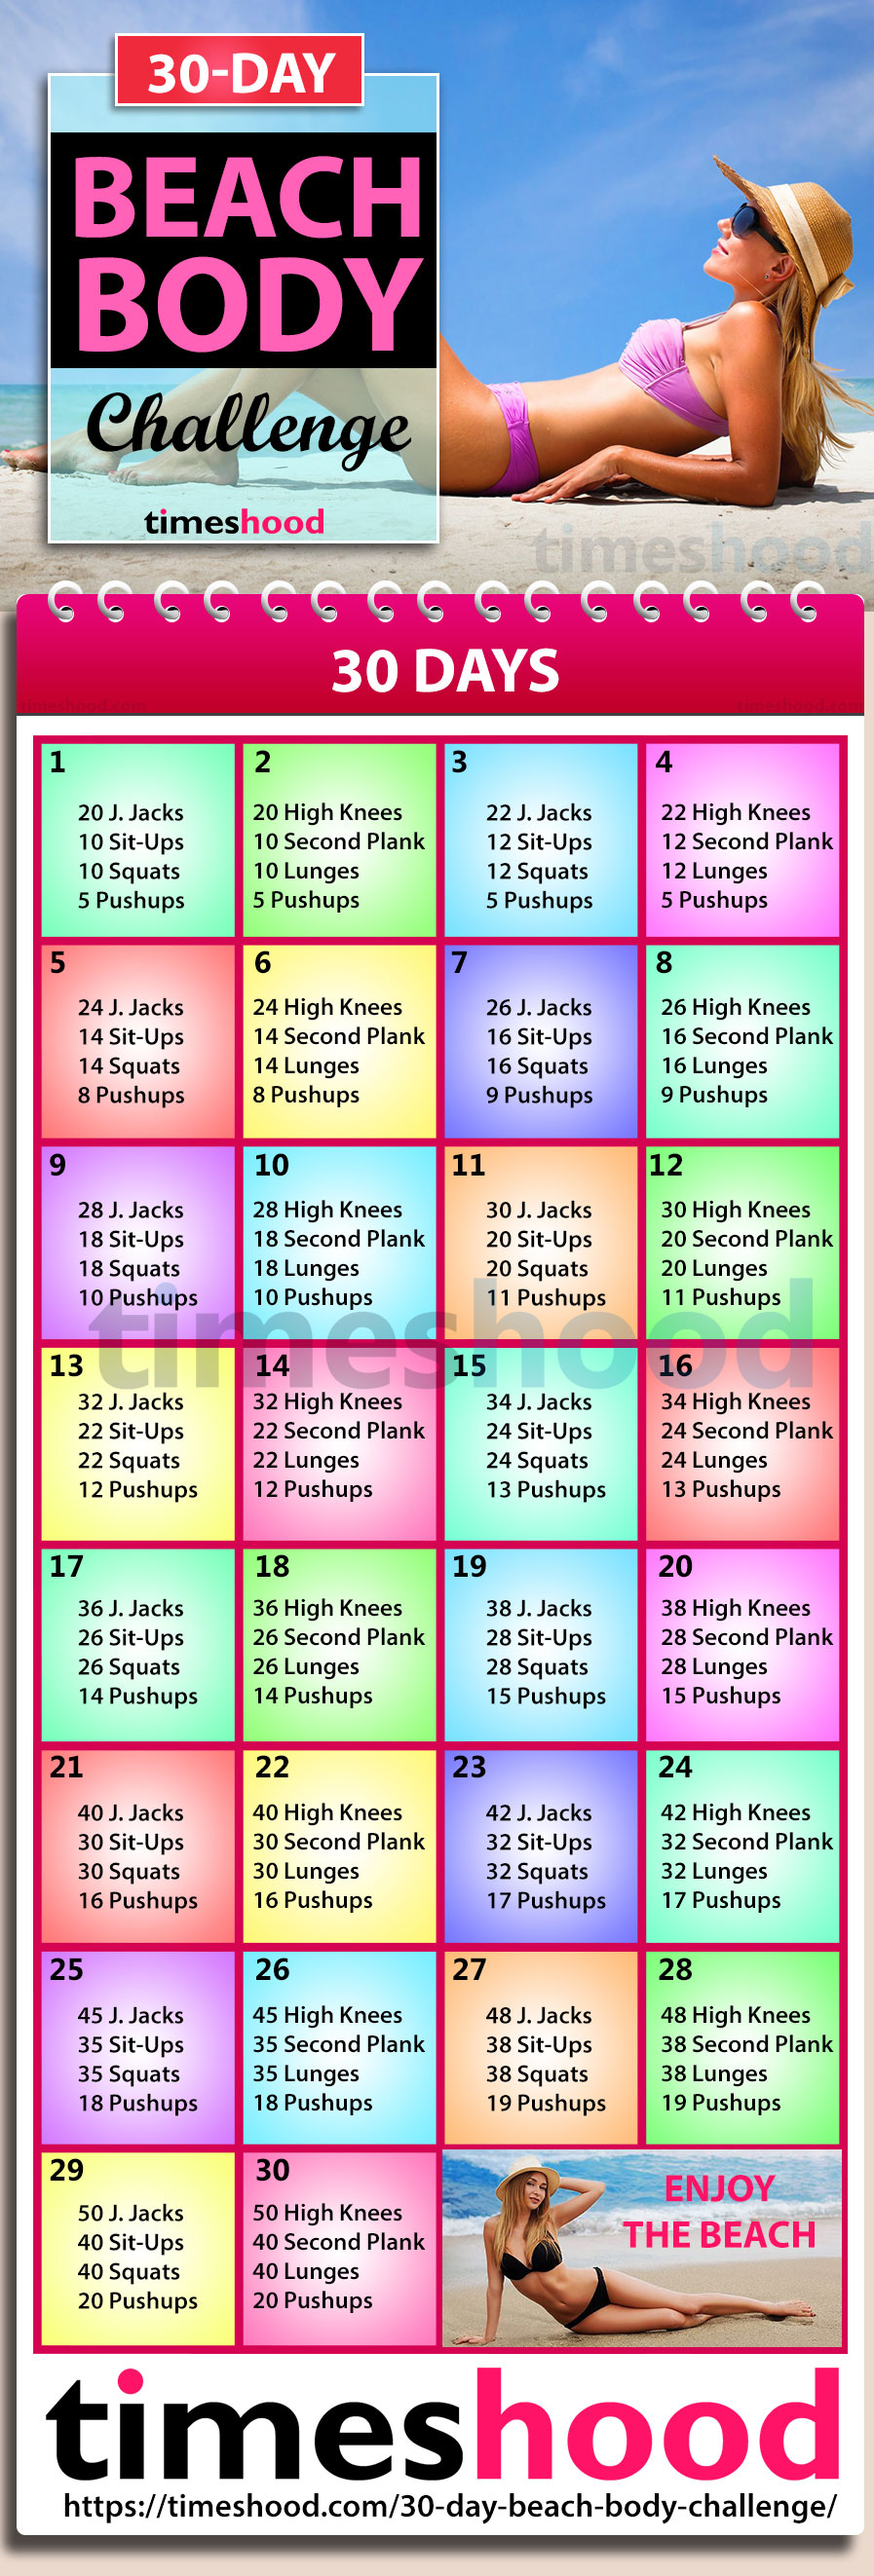 Looking for perfect beach body plan? Try this 30-day beach body challenge to get ready for beach fun. Best bikini body plan for women. now enjoy our sunbath with perfect curves and body shape. This powerful workouts will work great on your body. Flat belly, slim waist, sexy legs and bigger butt everything will turn to give you best curves. Best bikini body challenge. Best beach body workout challenge. Best summer workout for women.